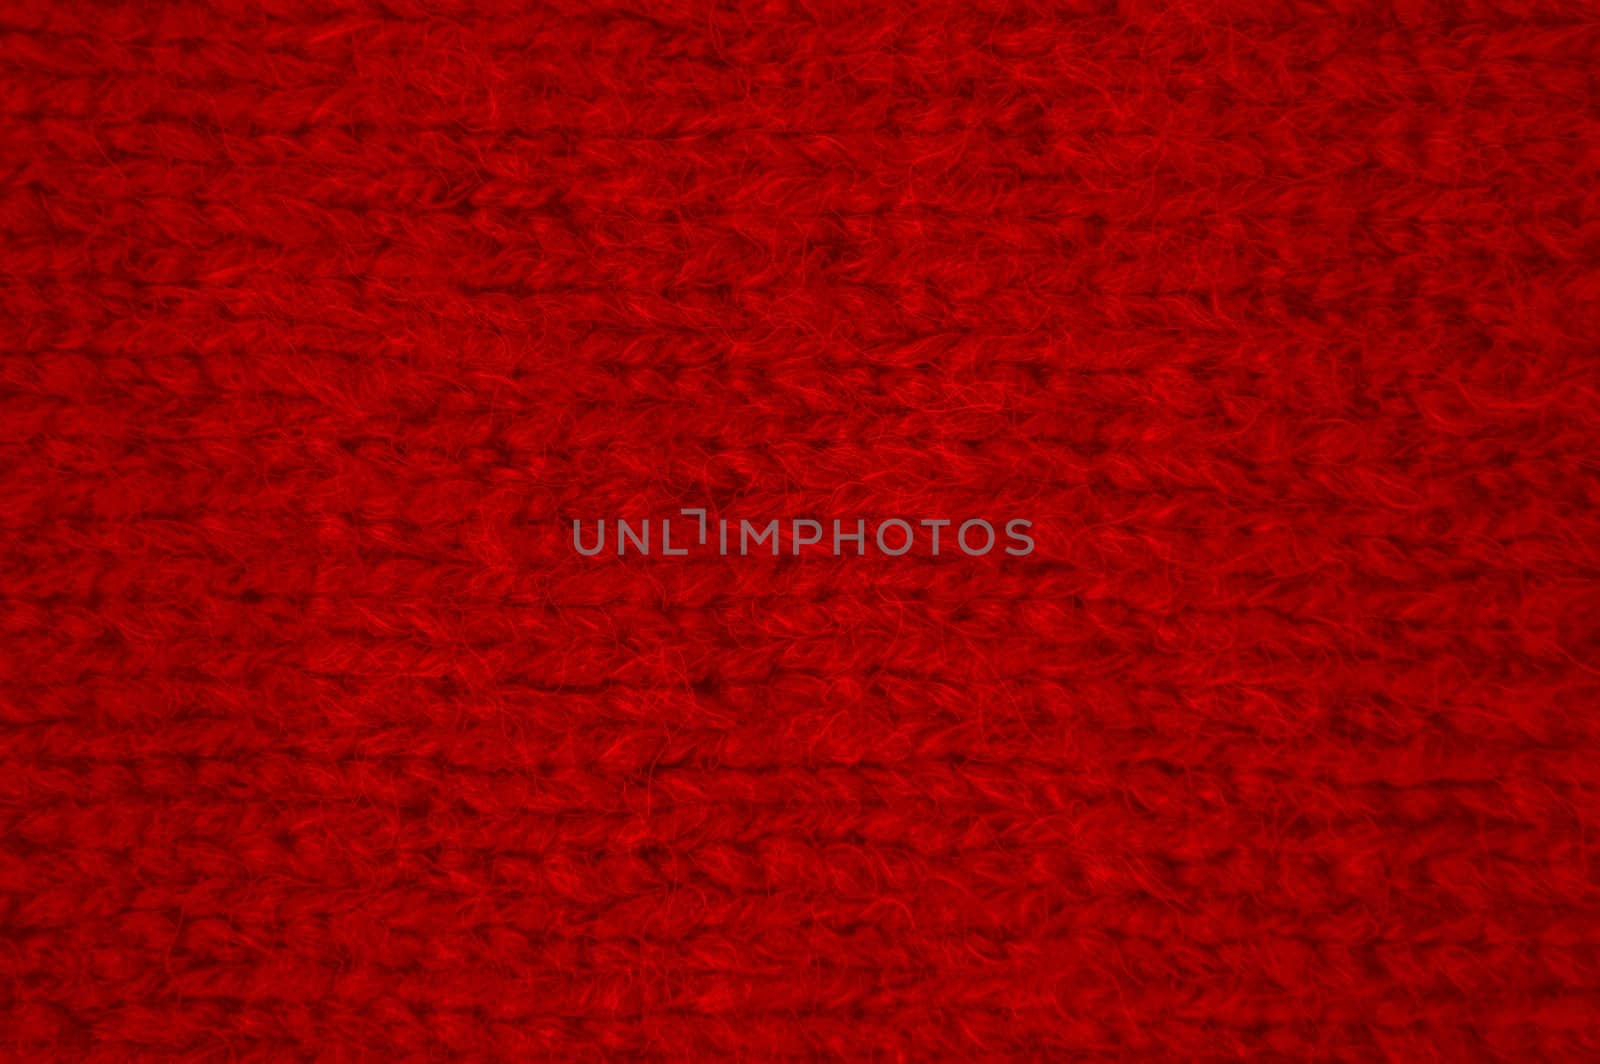 Knitted Wool. Vintage Woven Design. Cotton Jacquard Xmas Background. Structure Knitted Fabric. Red Closeup Thread. Nordic Christmas Carpet. Detail Decor Garment. Weave Abstract Wool.